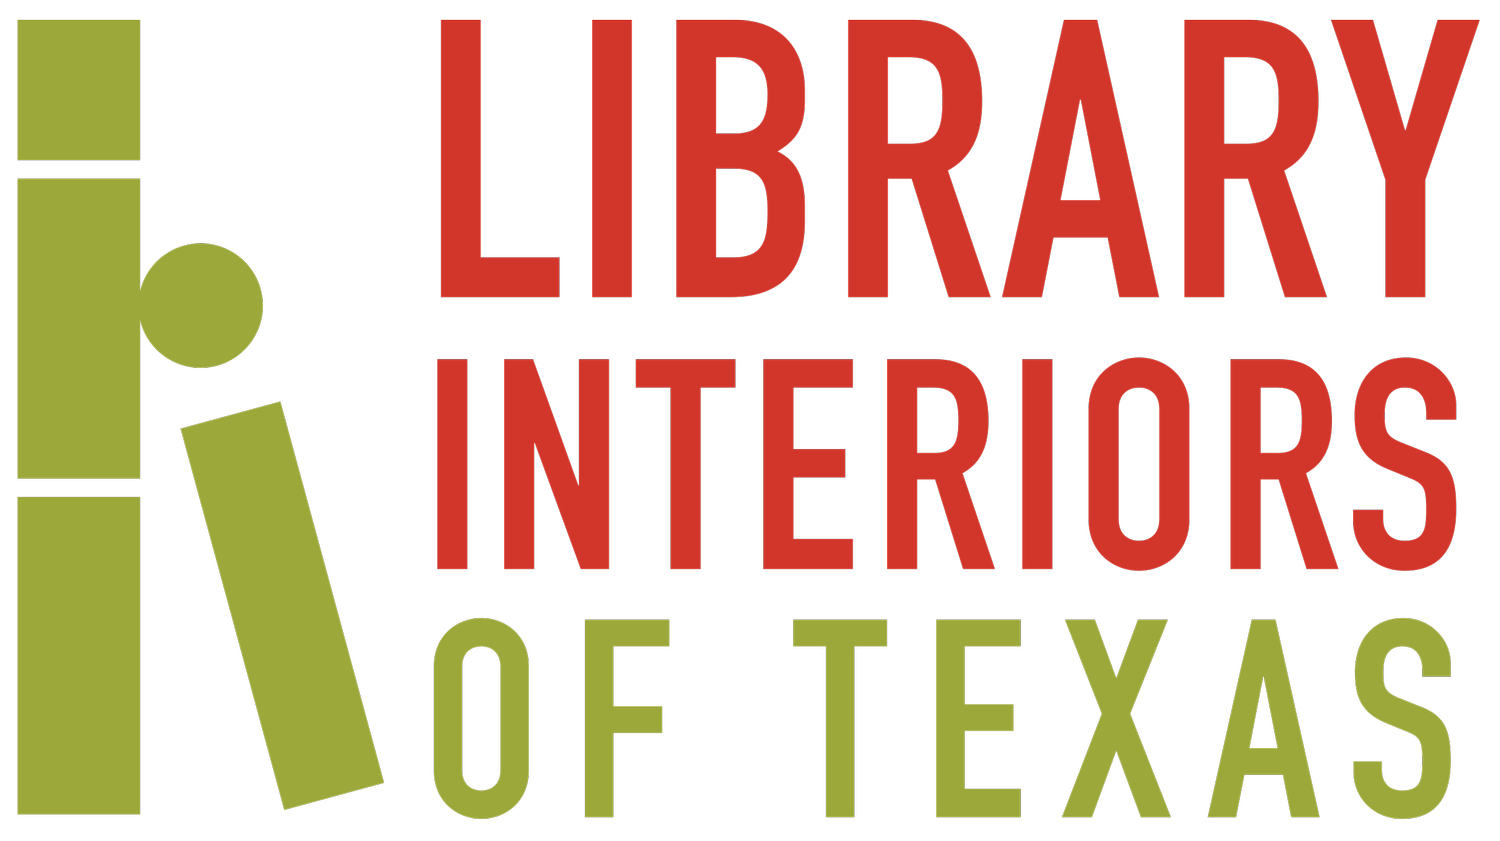 Library Interiors of Texas